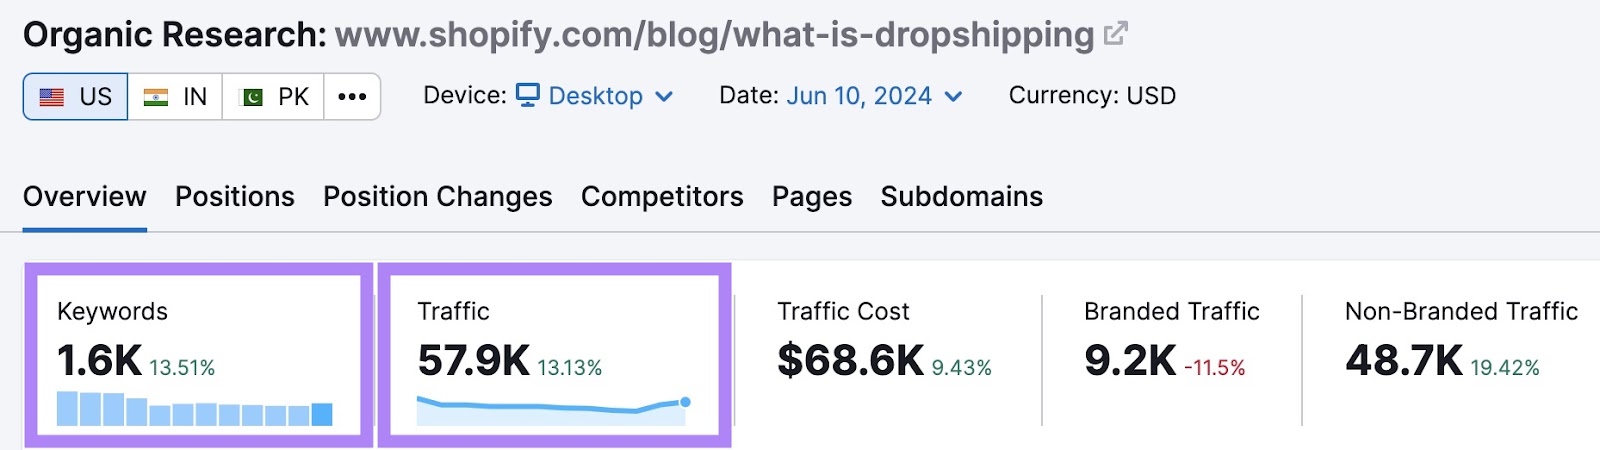 Overview report on Organic Research of a "what-is" pillar page by Shopify with the keywords and traffic columns highlighted.